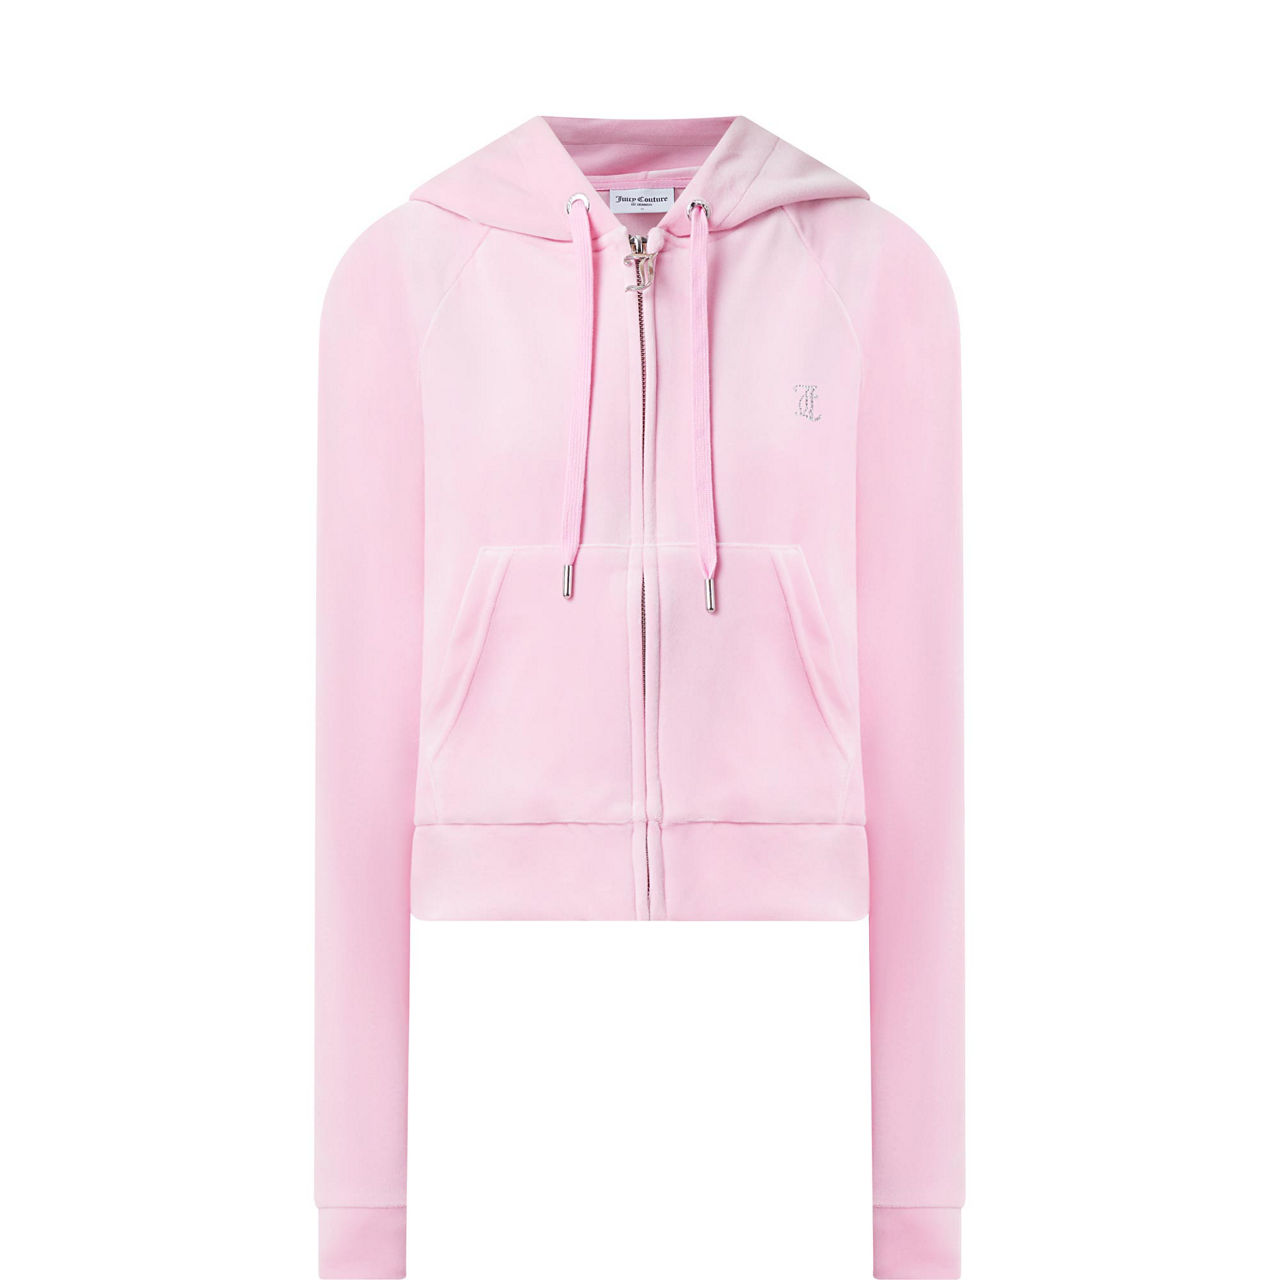 Juicy Couture has officially launched at Brown Thomas and Arnotts